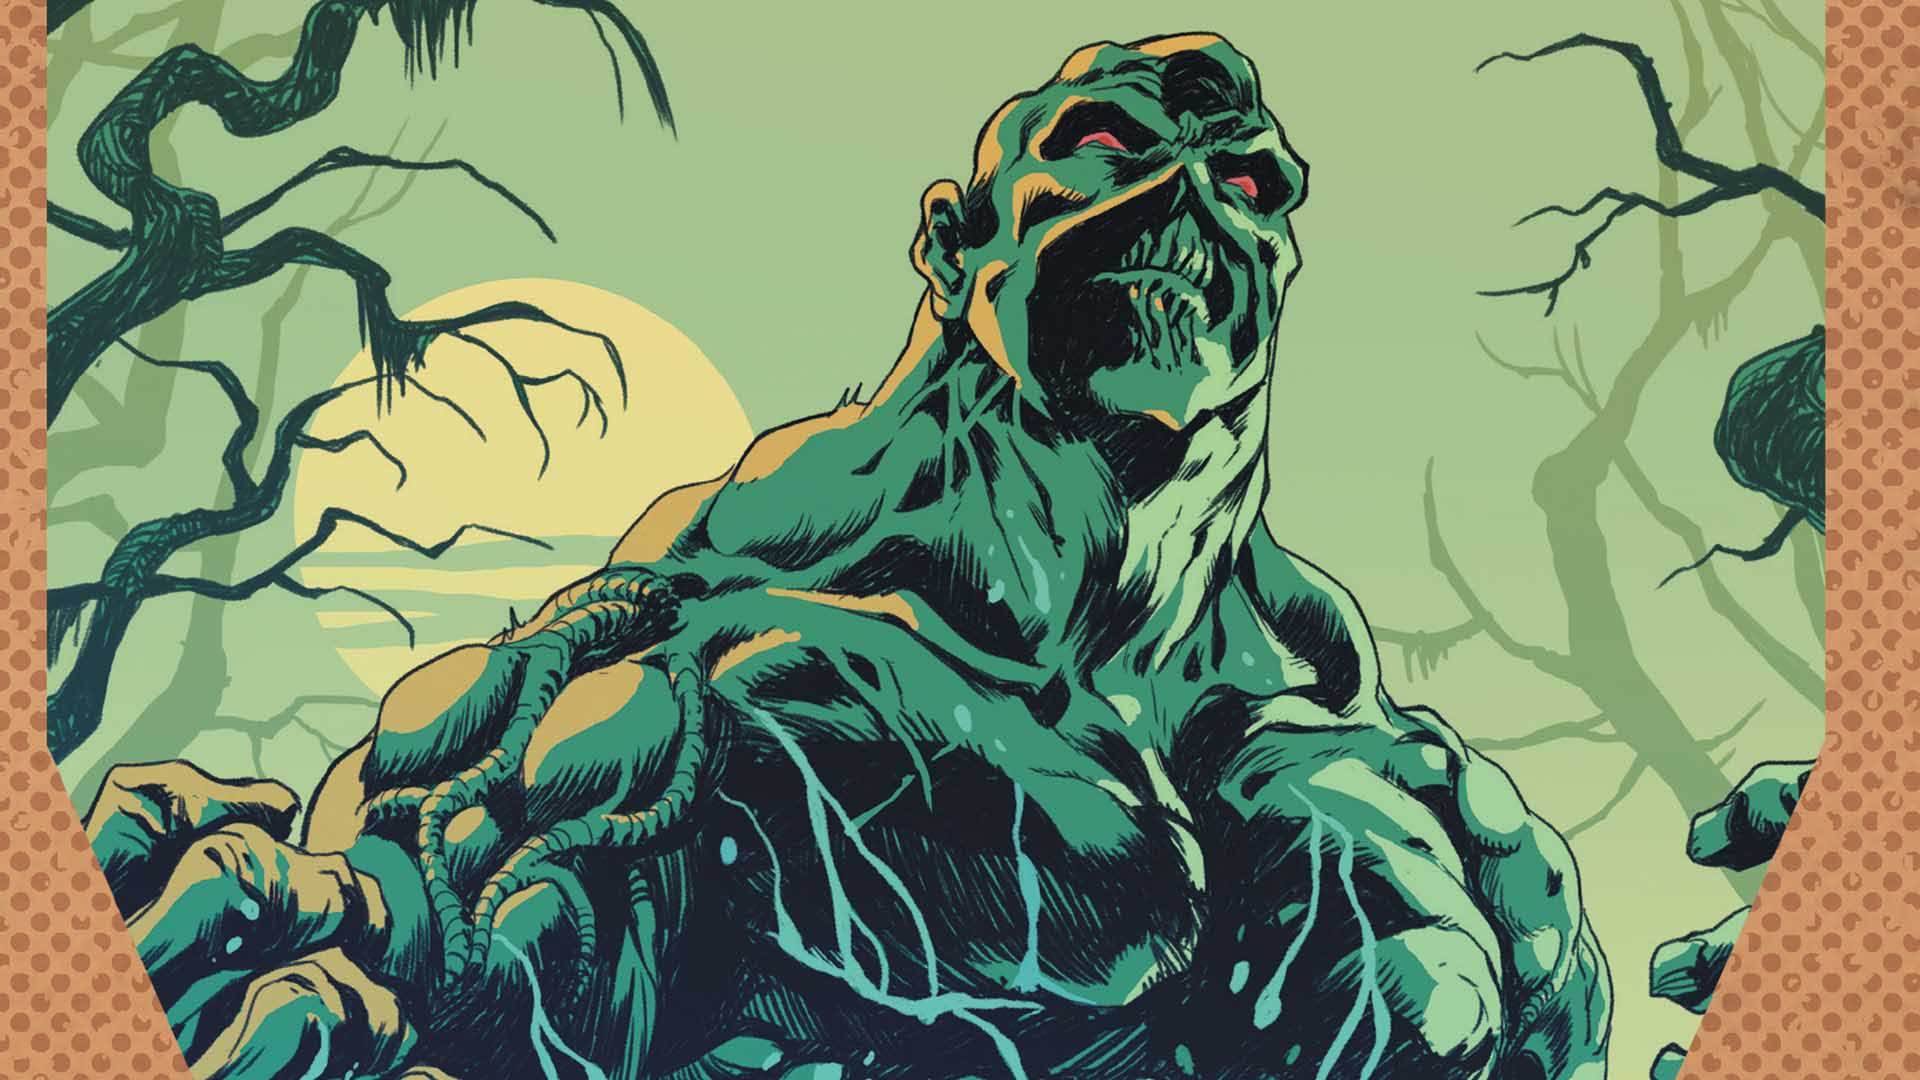 THINGS Giving Presents: A Trip To Visit The SWAMP THING